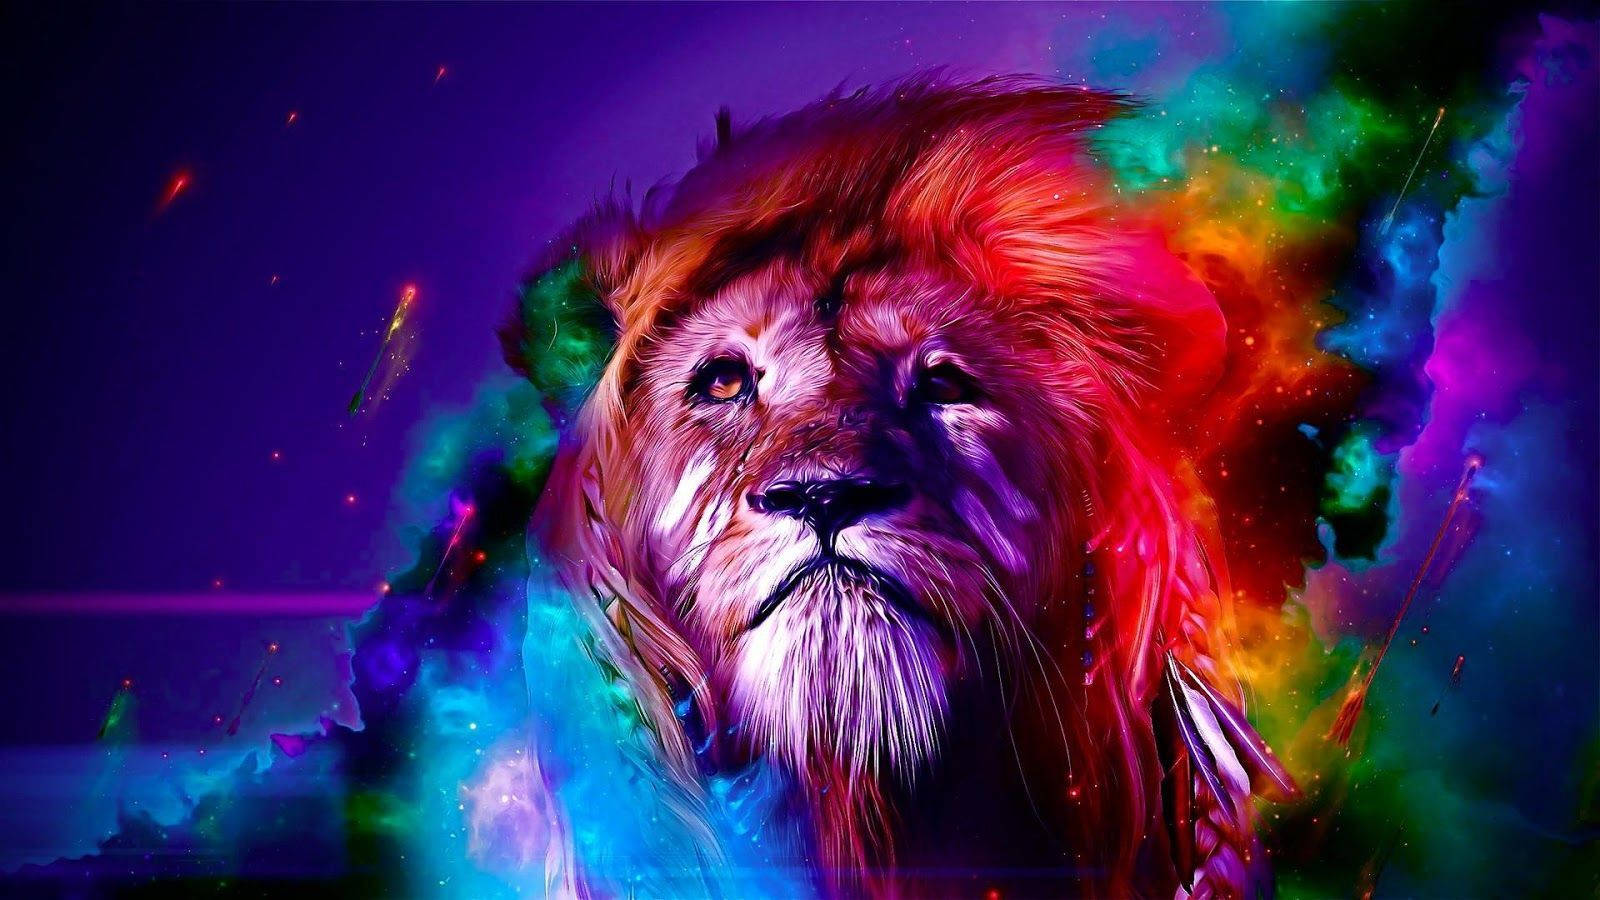 Cool Lion Colorful Space Background Wallpaper